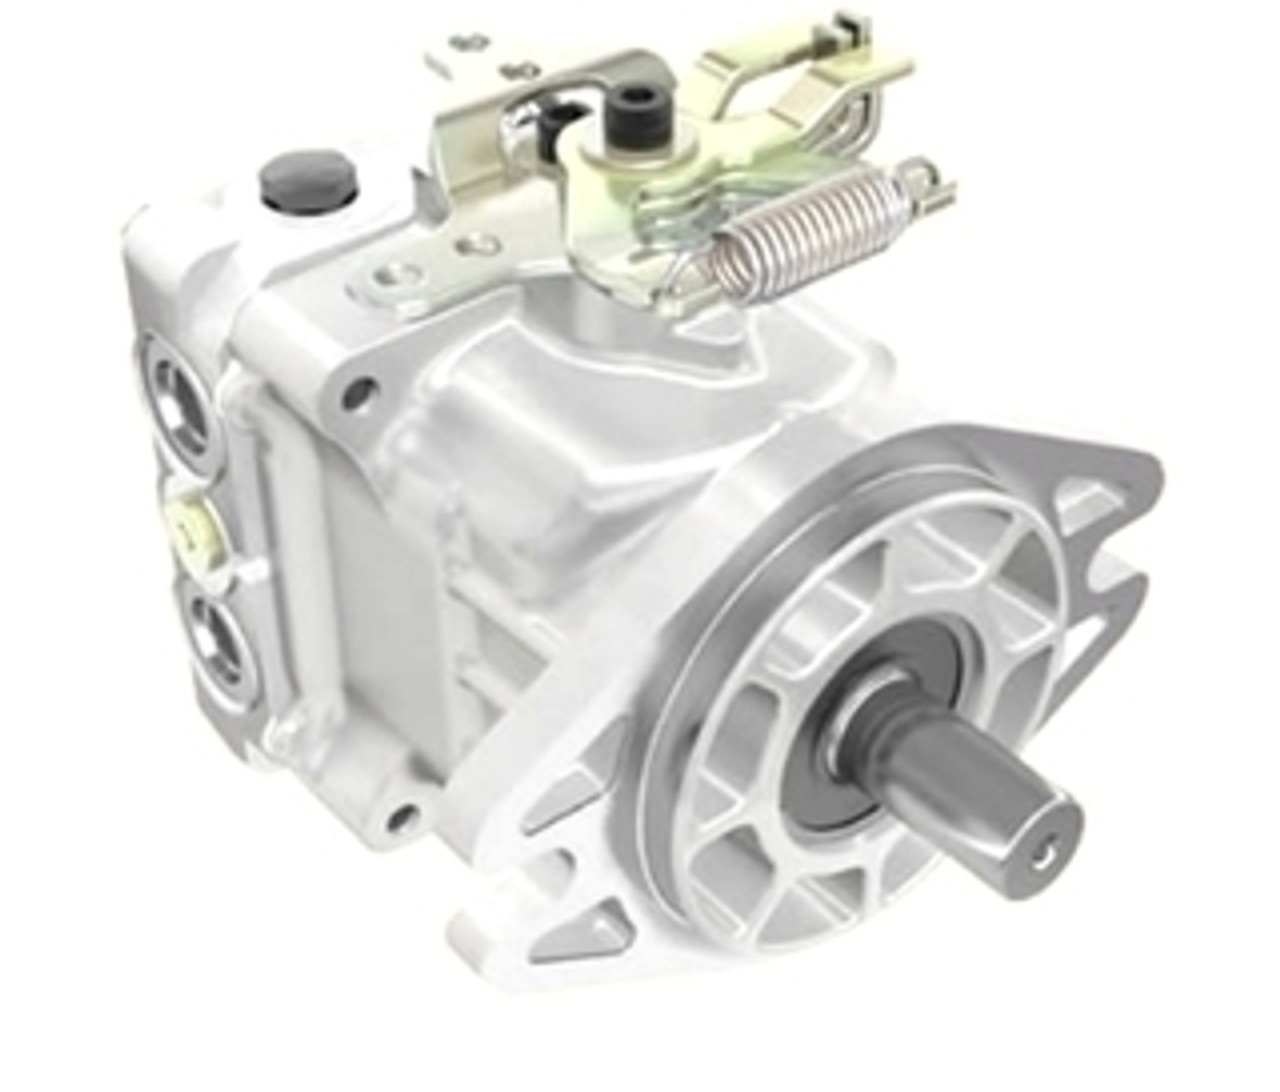 Scag,  Hydro Pump,  48551, IN STOCK